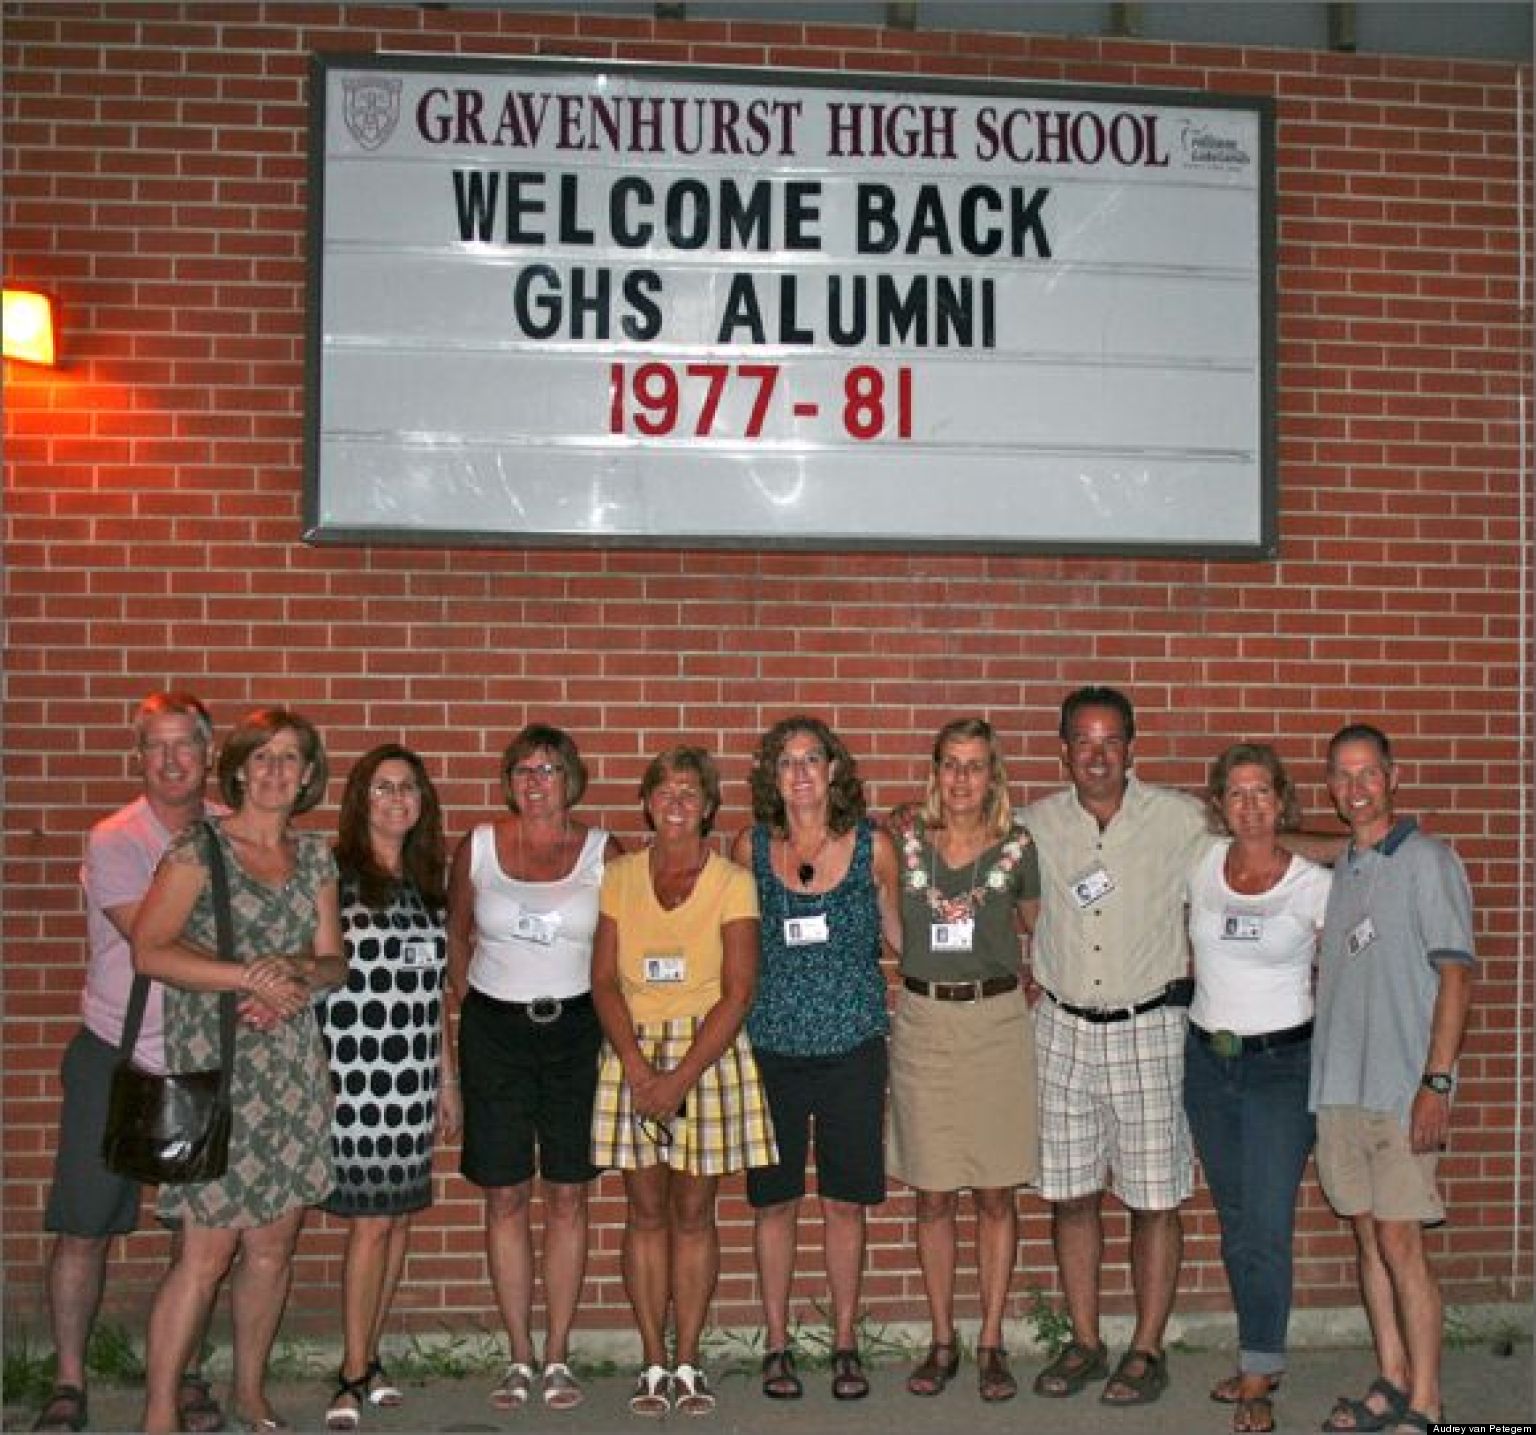 do high schools really have reunions